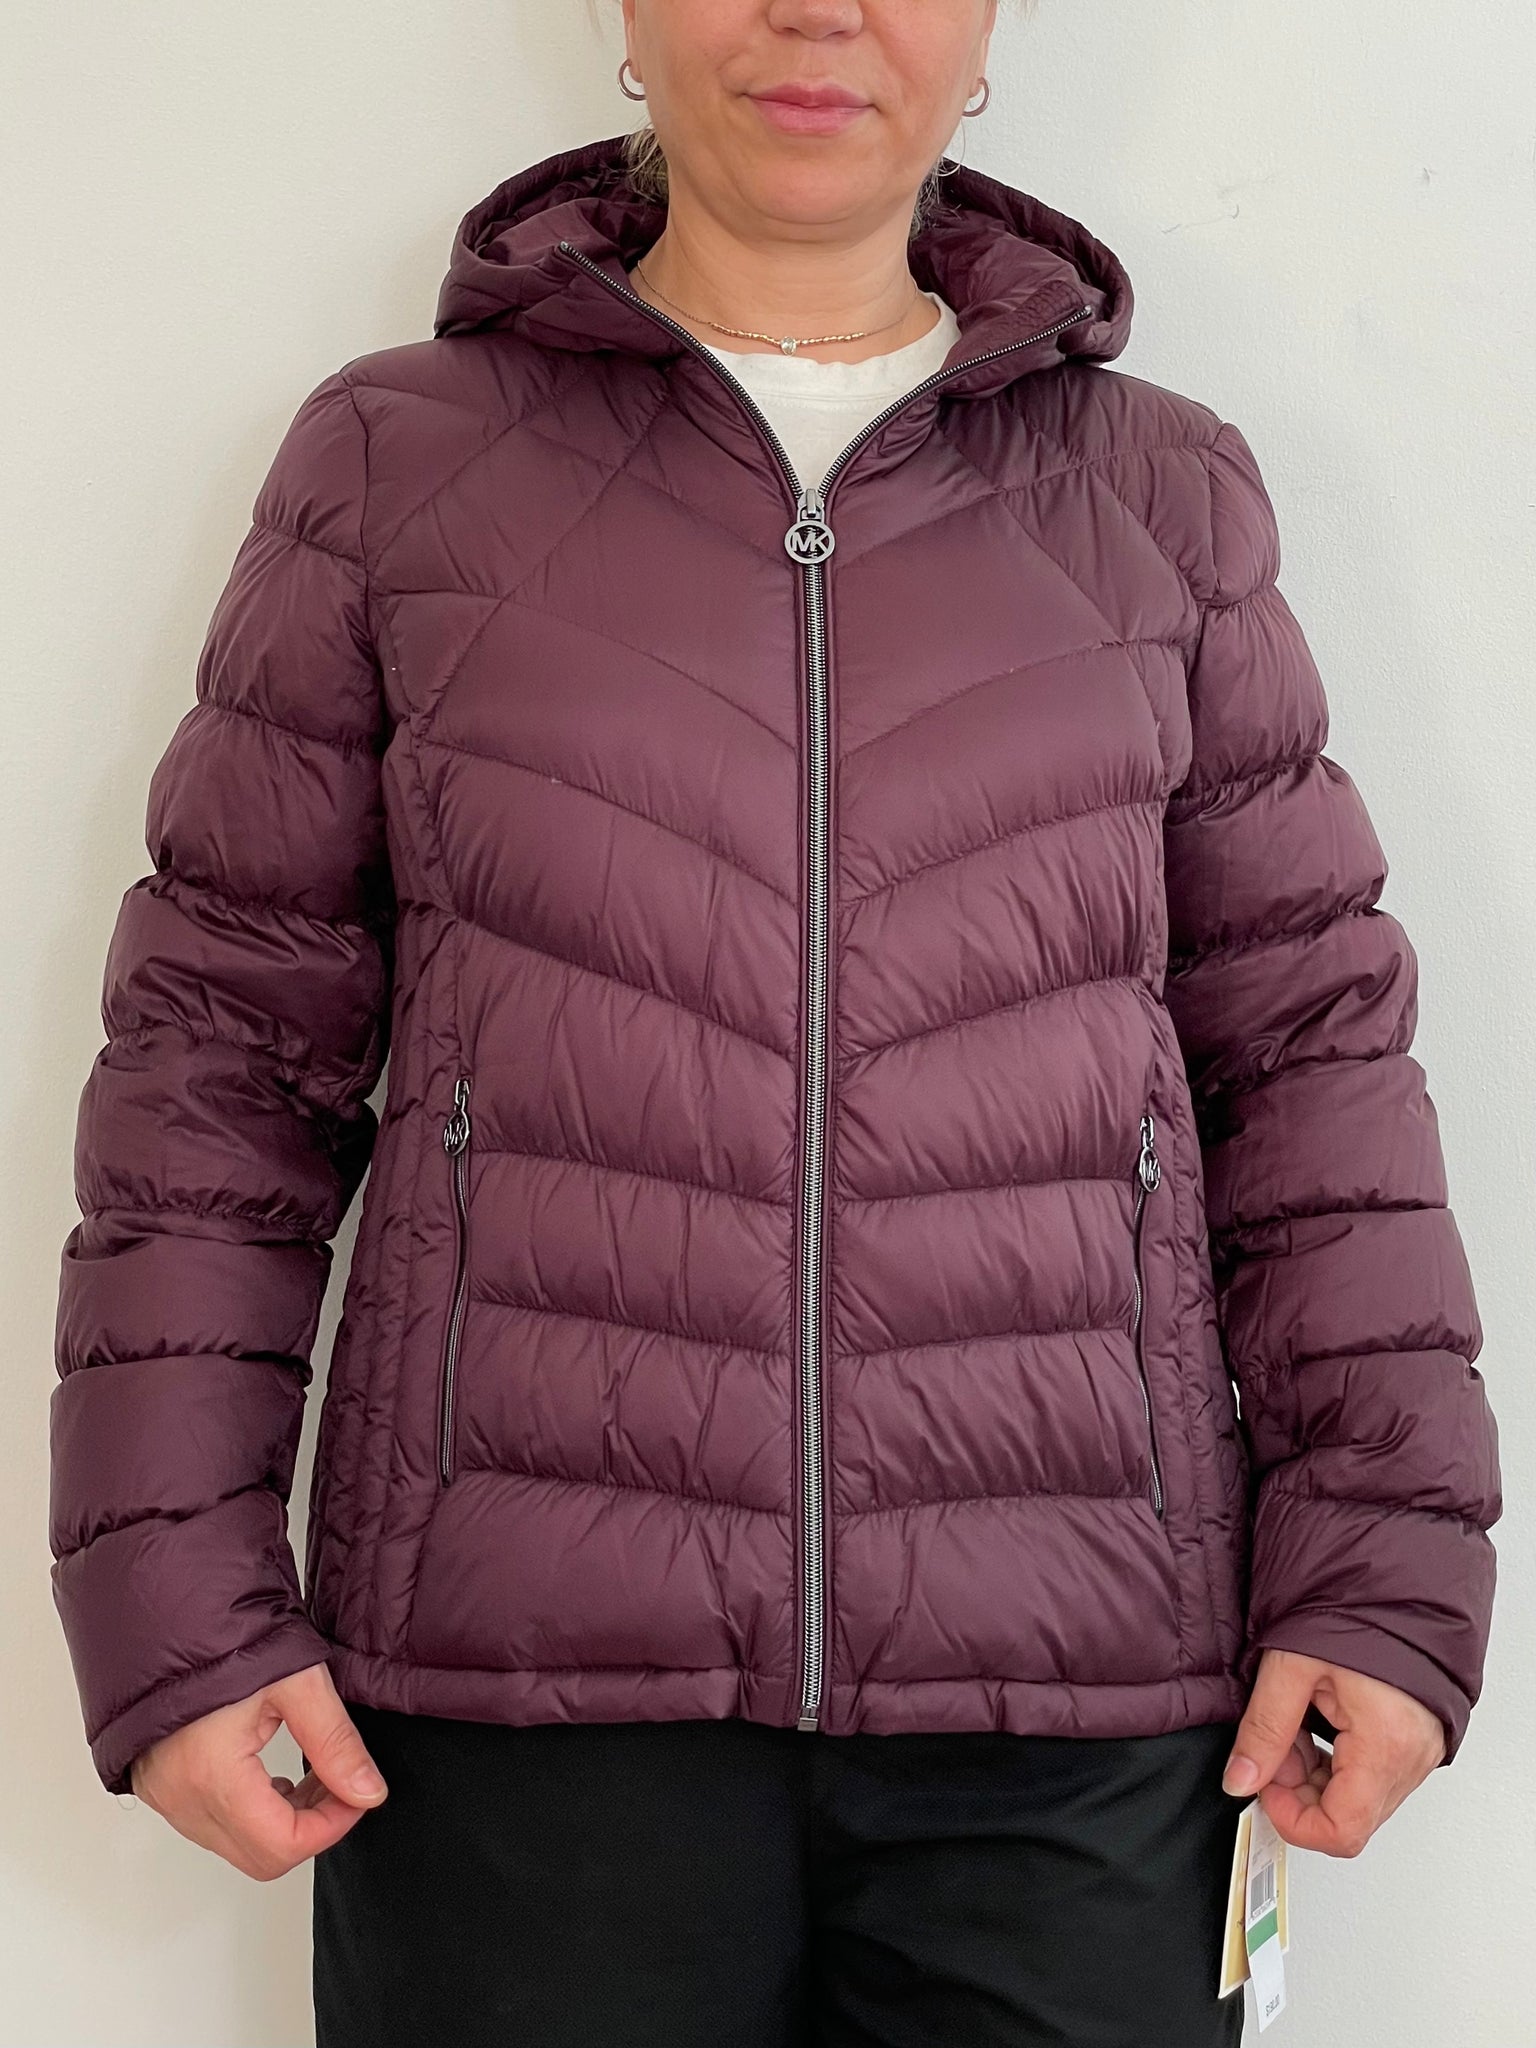 Michael Kors Women's Packable Down Fill Puffer Jacket Burgundy – Clearo  Limited